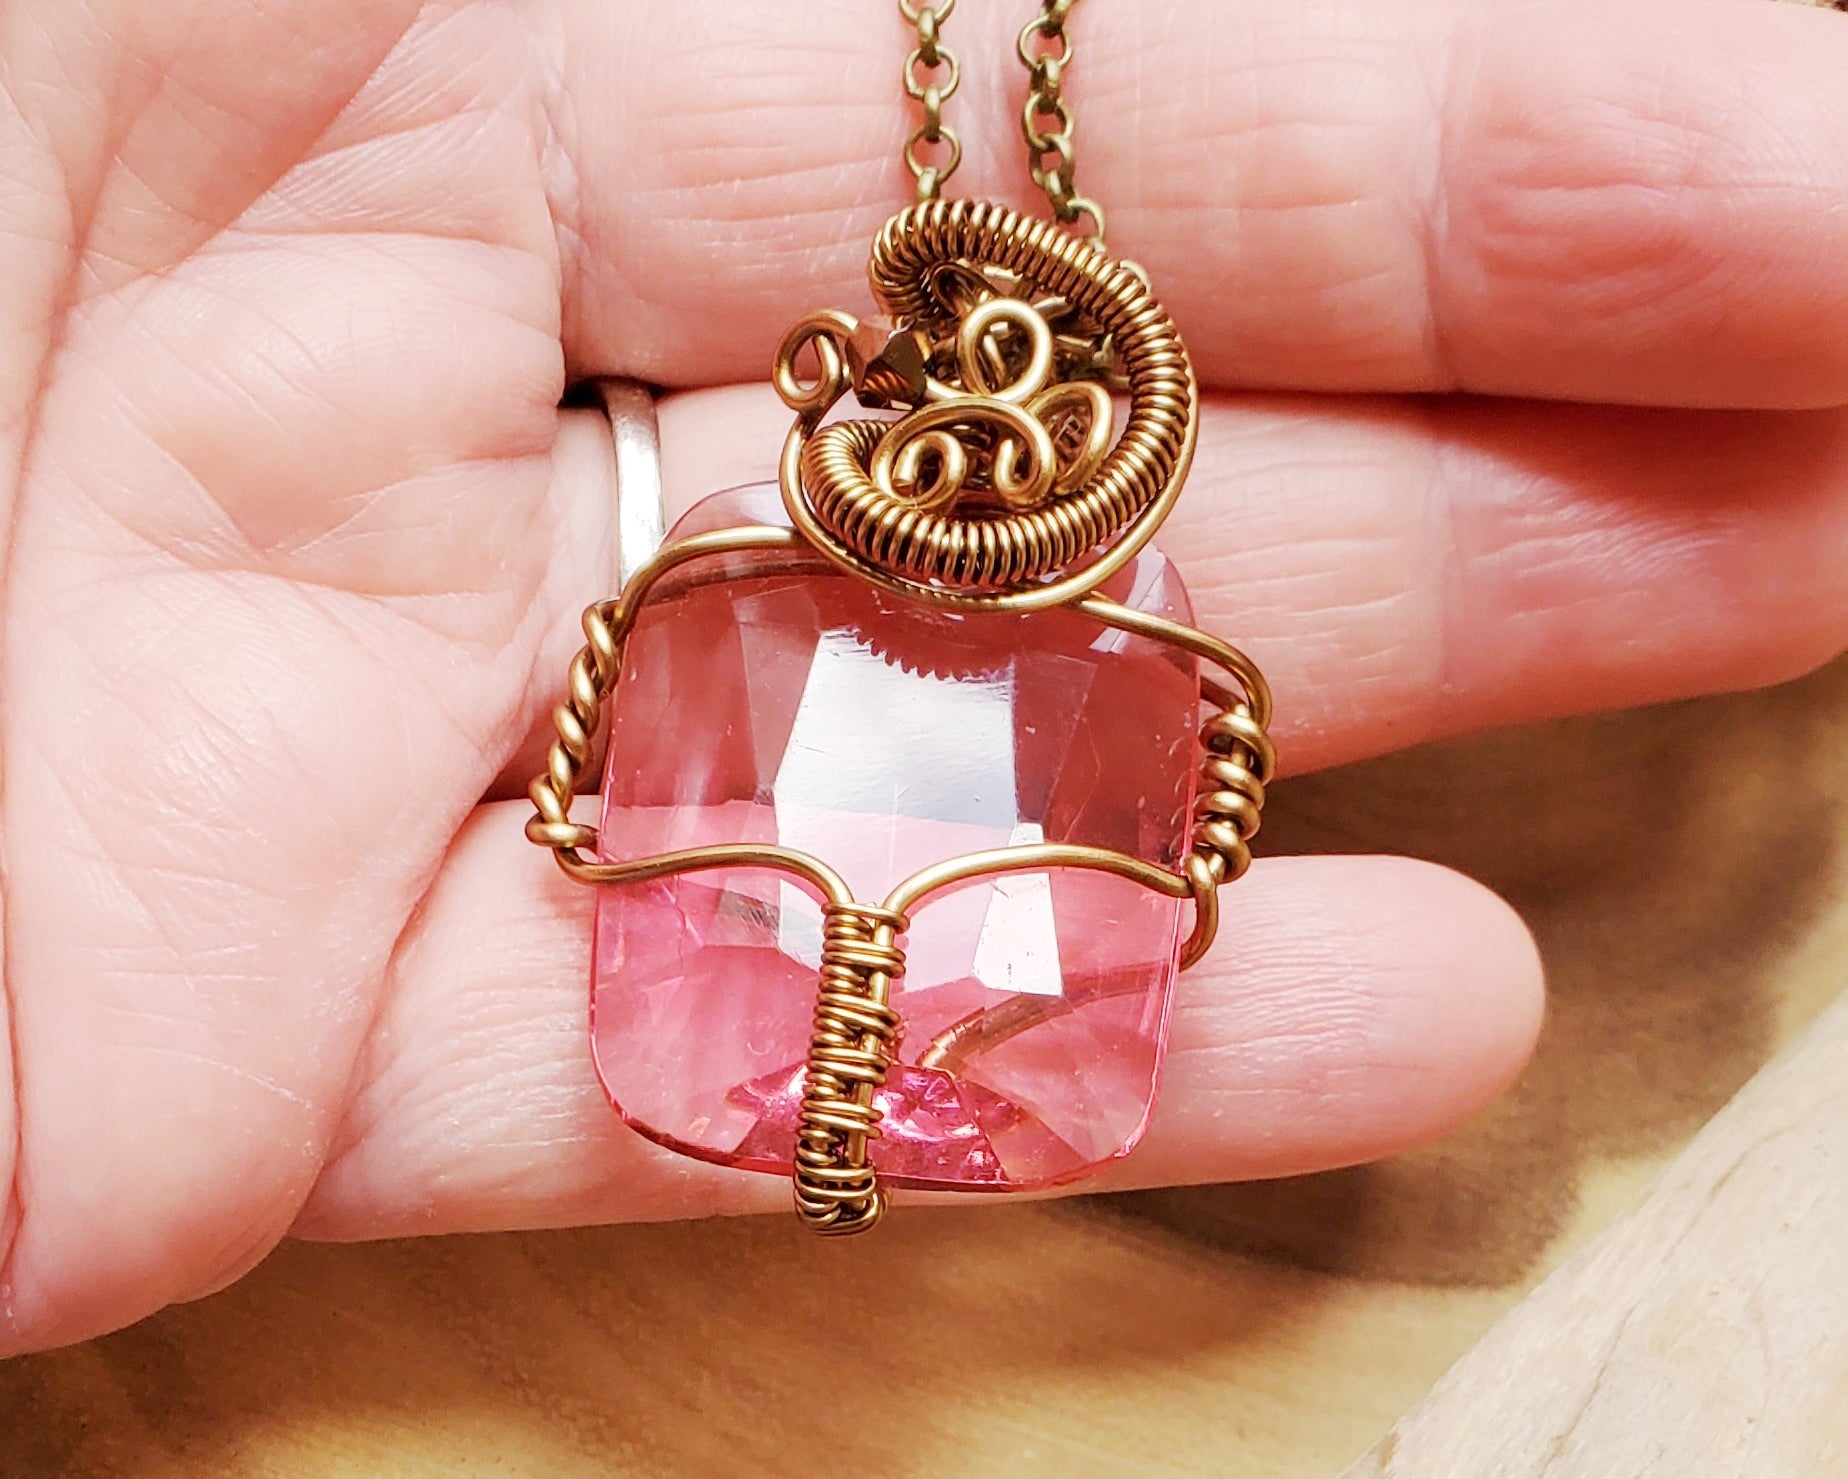 Vintage Rose Pink Glass Pendant, Large Wire Wrapped Vintage Glass Pendant on Chain, Antique Brass